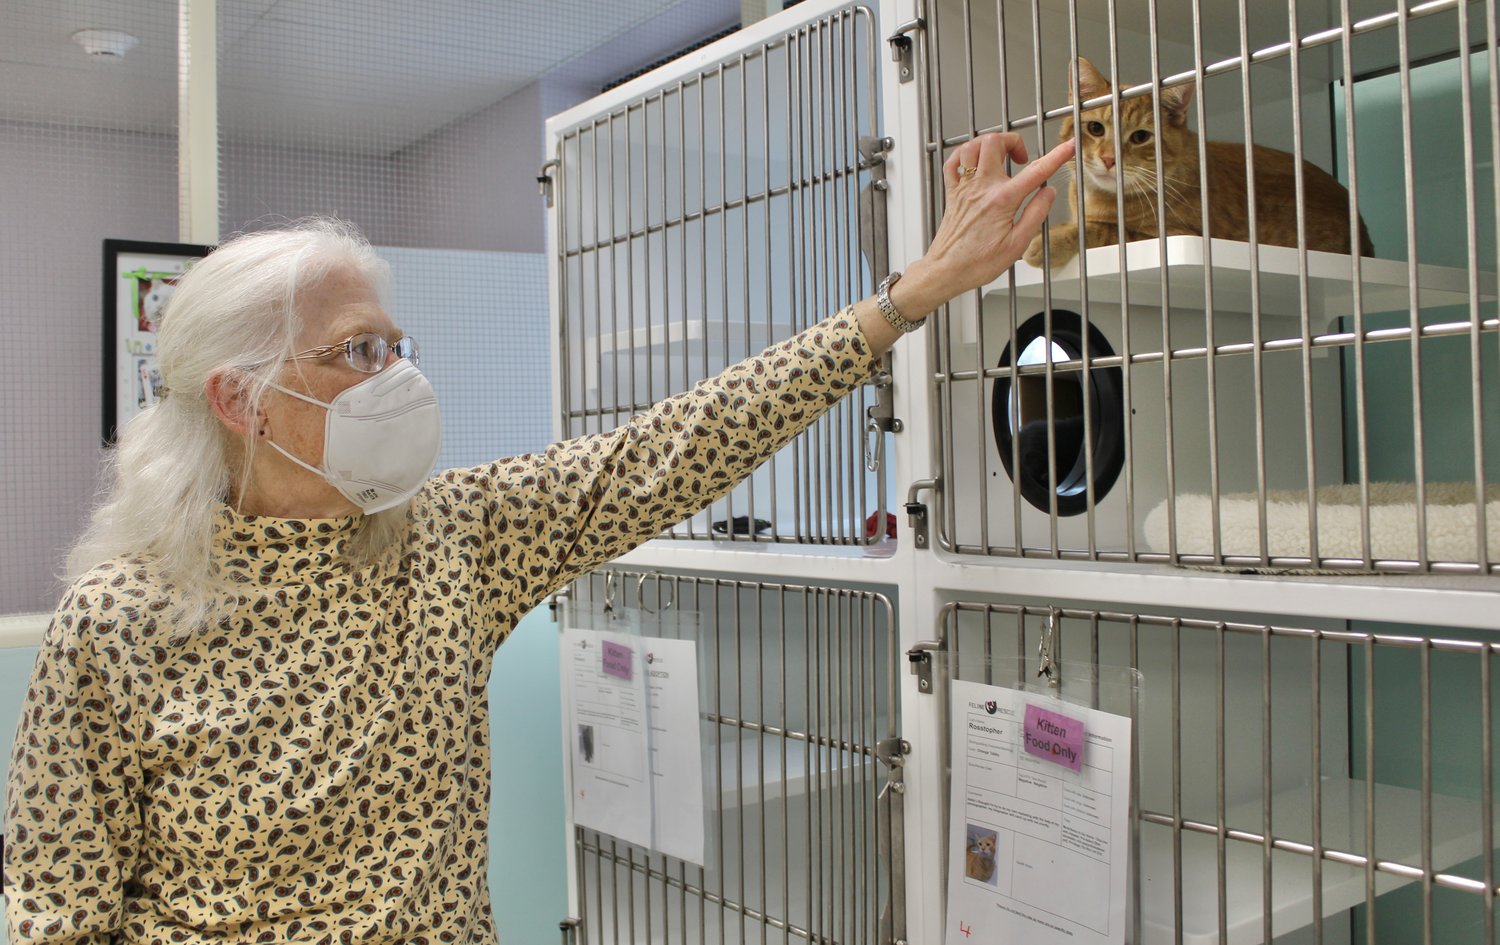 Volunteer Gail Frethem plays with Rosstopher at the Feline Rescue shelter, located at 593 Fairview Ave N. The organization is always lookng for help at its shelter and to foster cats. (Photo by Penny Fuller)